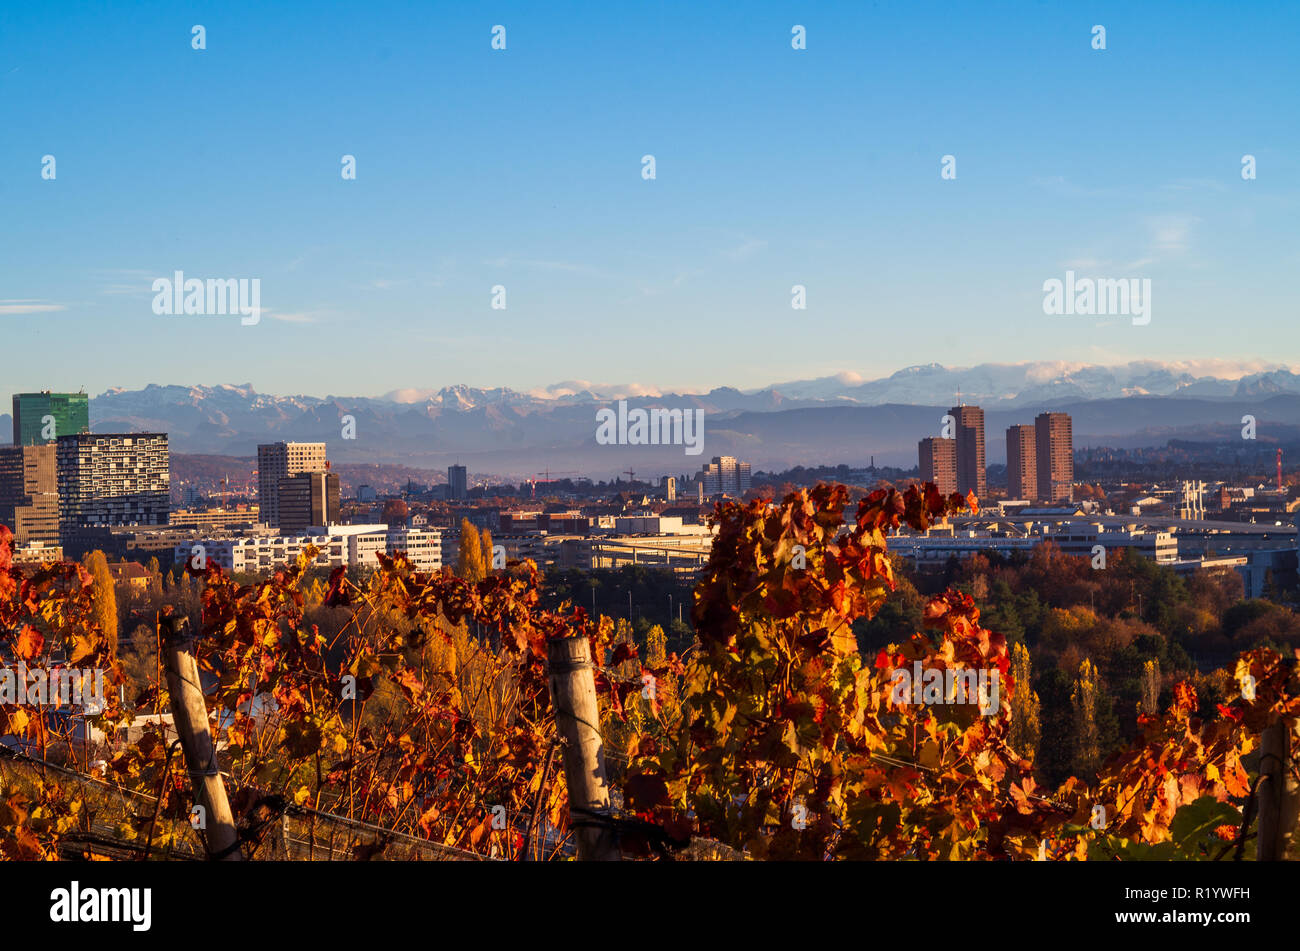 Zurich city vista from atop of Hongg in autumn at sunset warm tone  vineyard after harvest  in the foreground Stock Photo